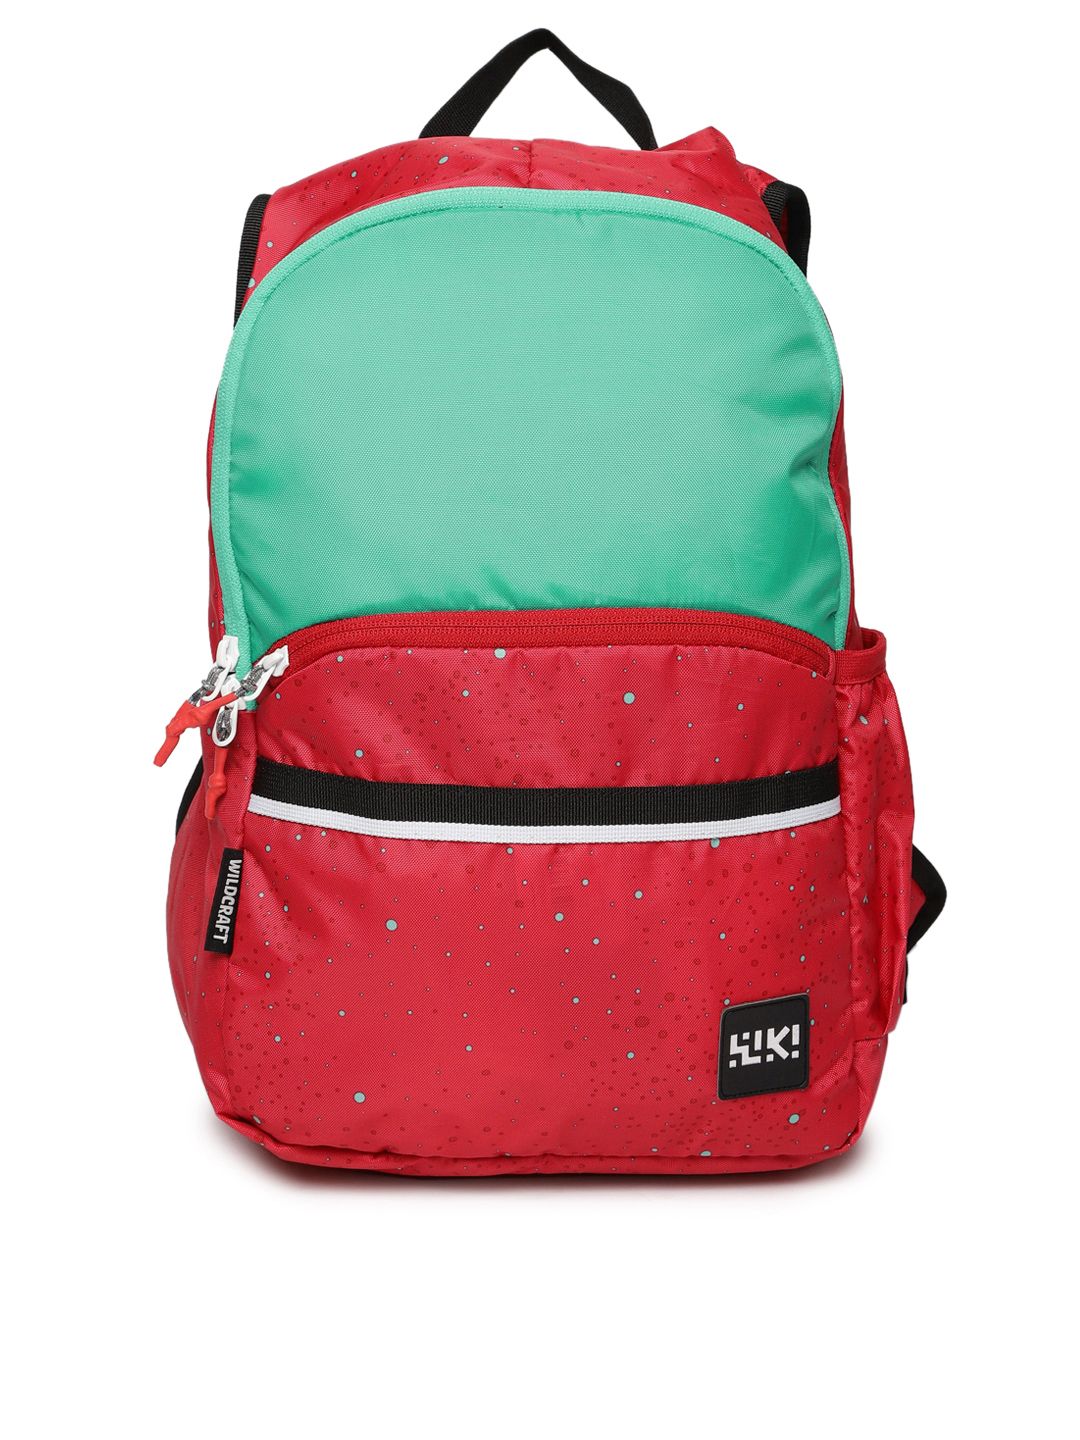 Wildcraft Unisex Red & Green Colourblocked Backpack Price in India